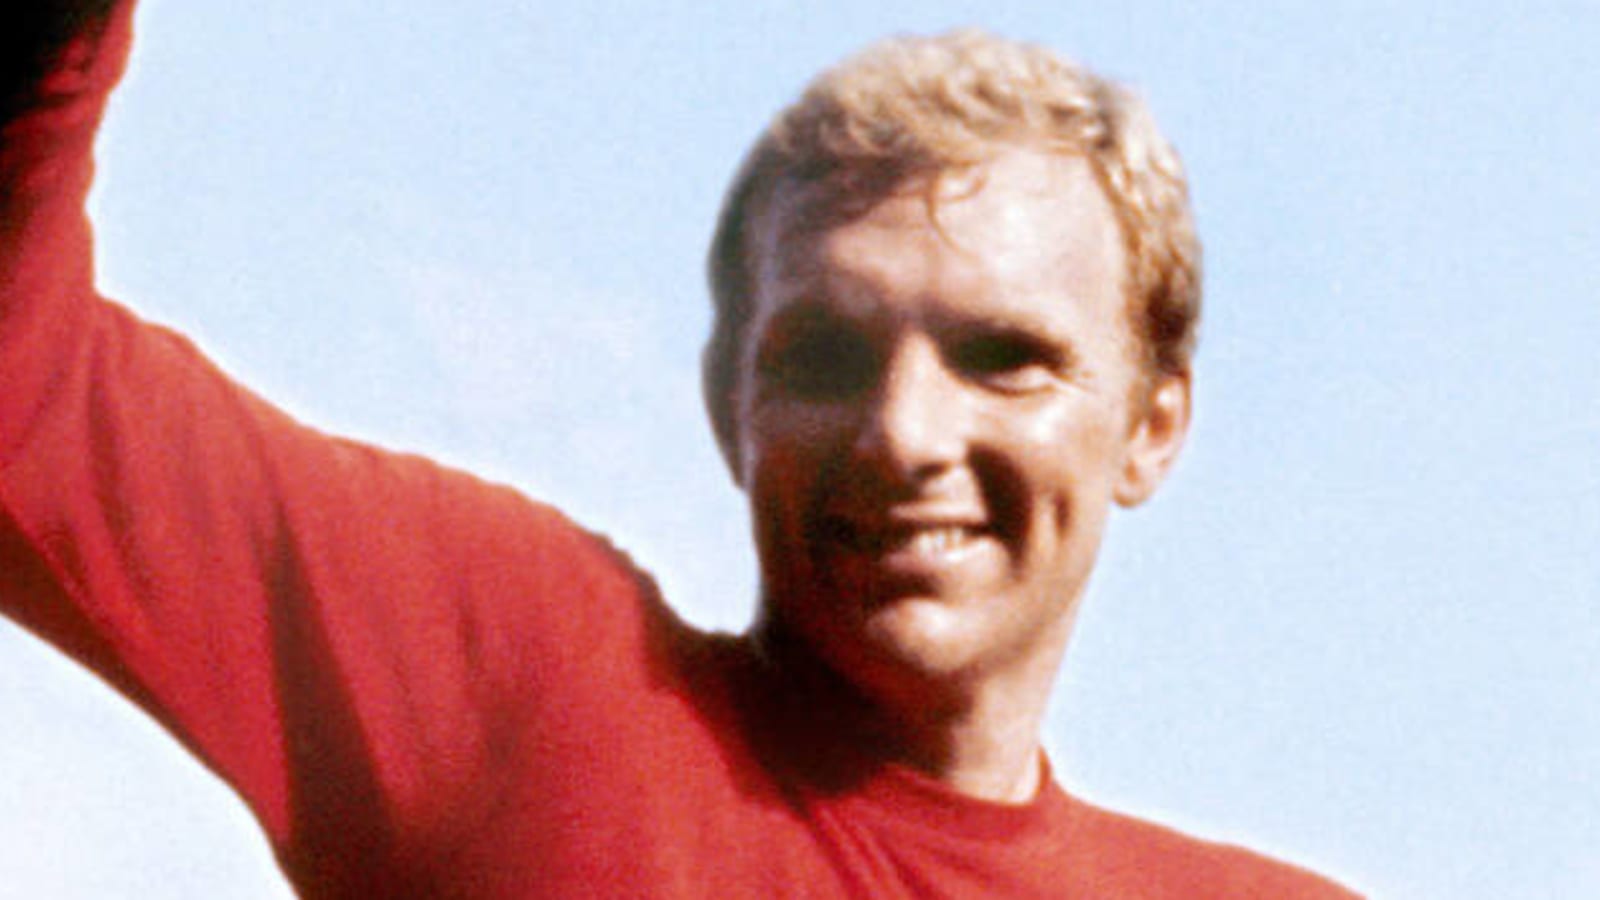 Ex-Wife of 1966 World Cup winner reveals crazy story about former husband’s prized match shirt